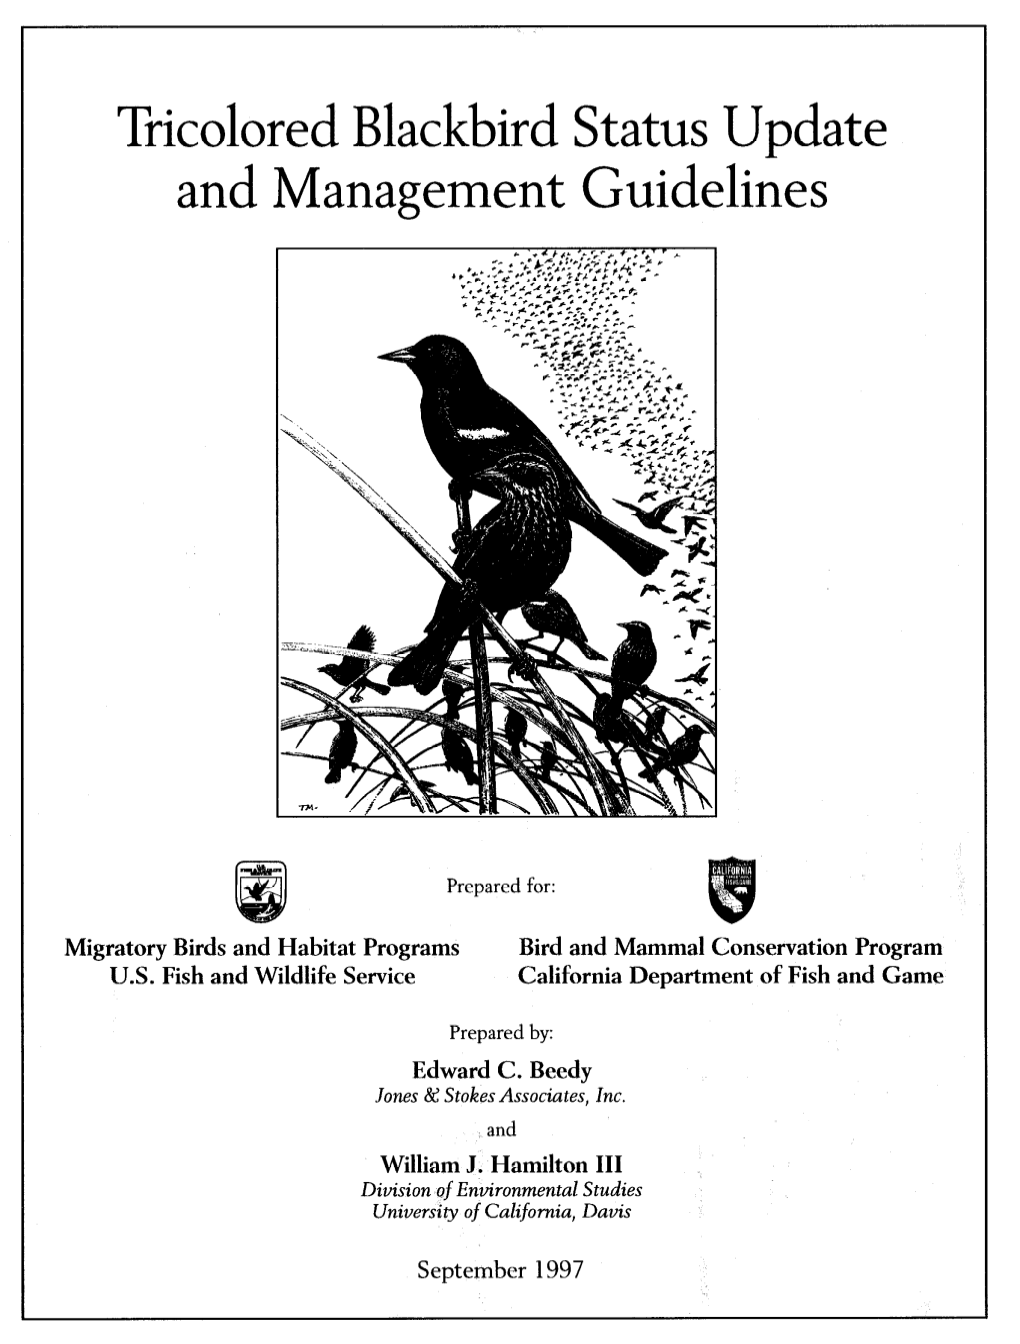 Appendix a General Guidelines for Locating and Monitoring Tricolored Blackbird Colonies